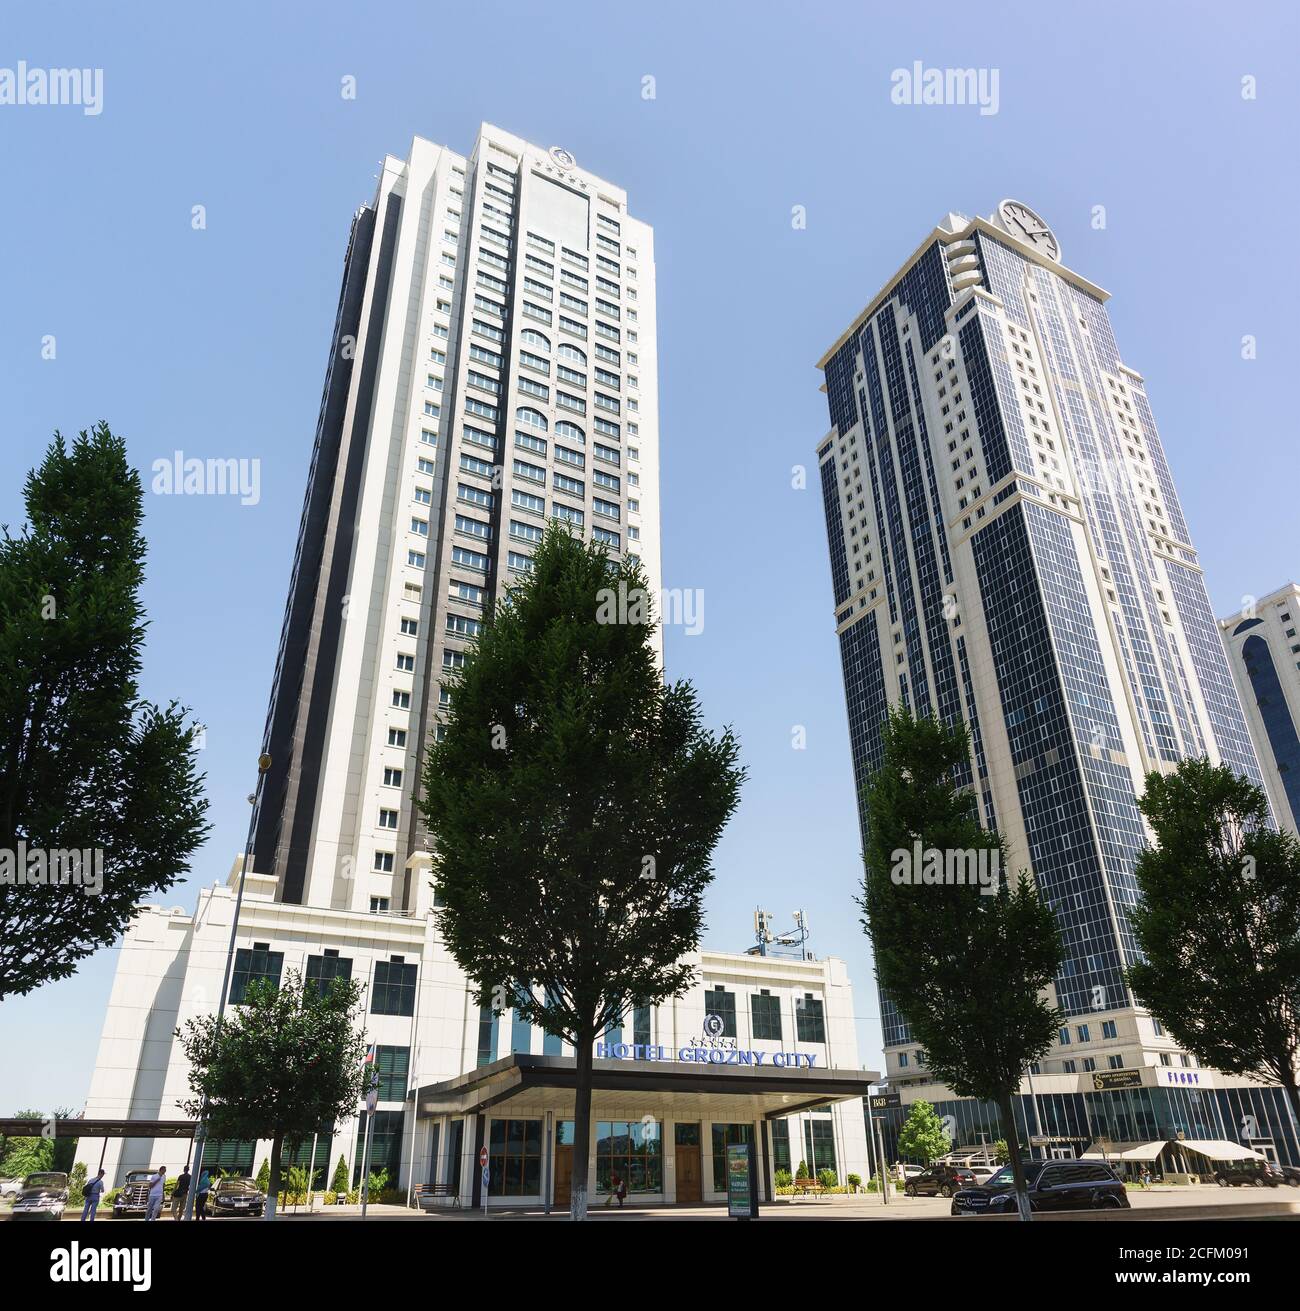 Grozny, Chechen Republic, Russia - June 02, 2019: Complex of high-rise futurist buildings Grozny city in the city center: the hotel of the same name a Stock Photo